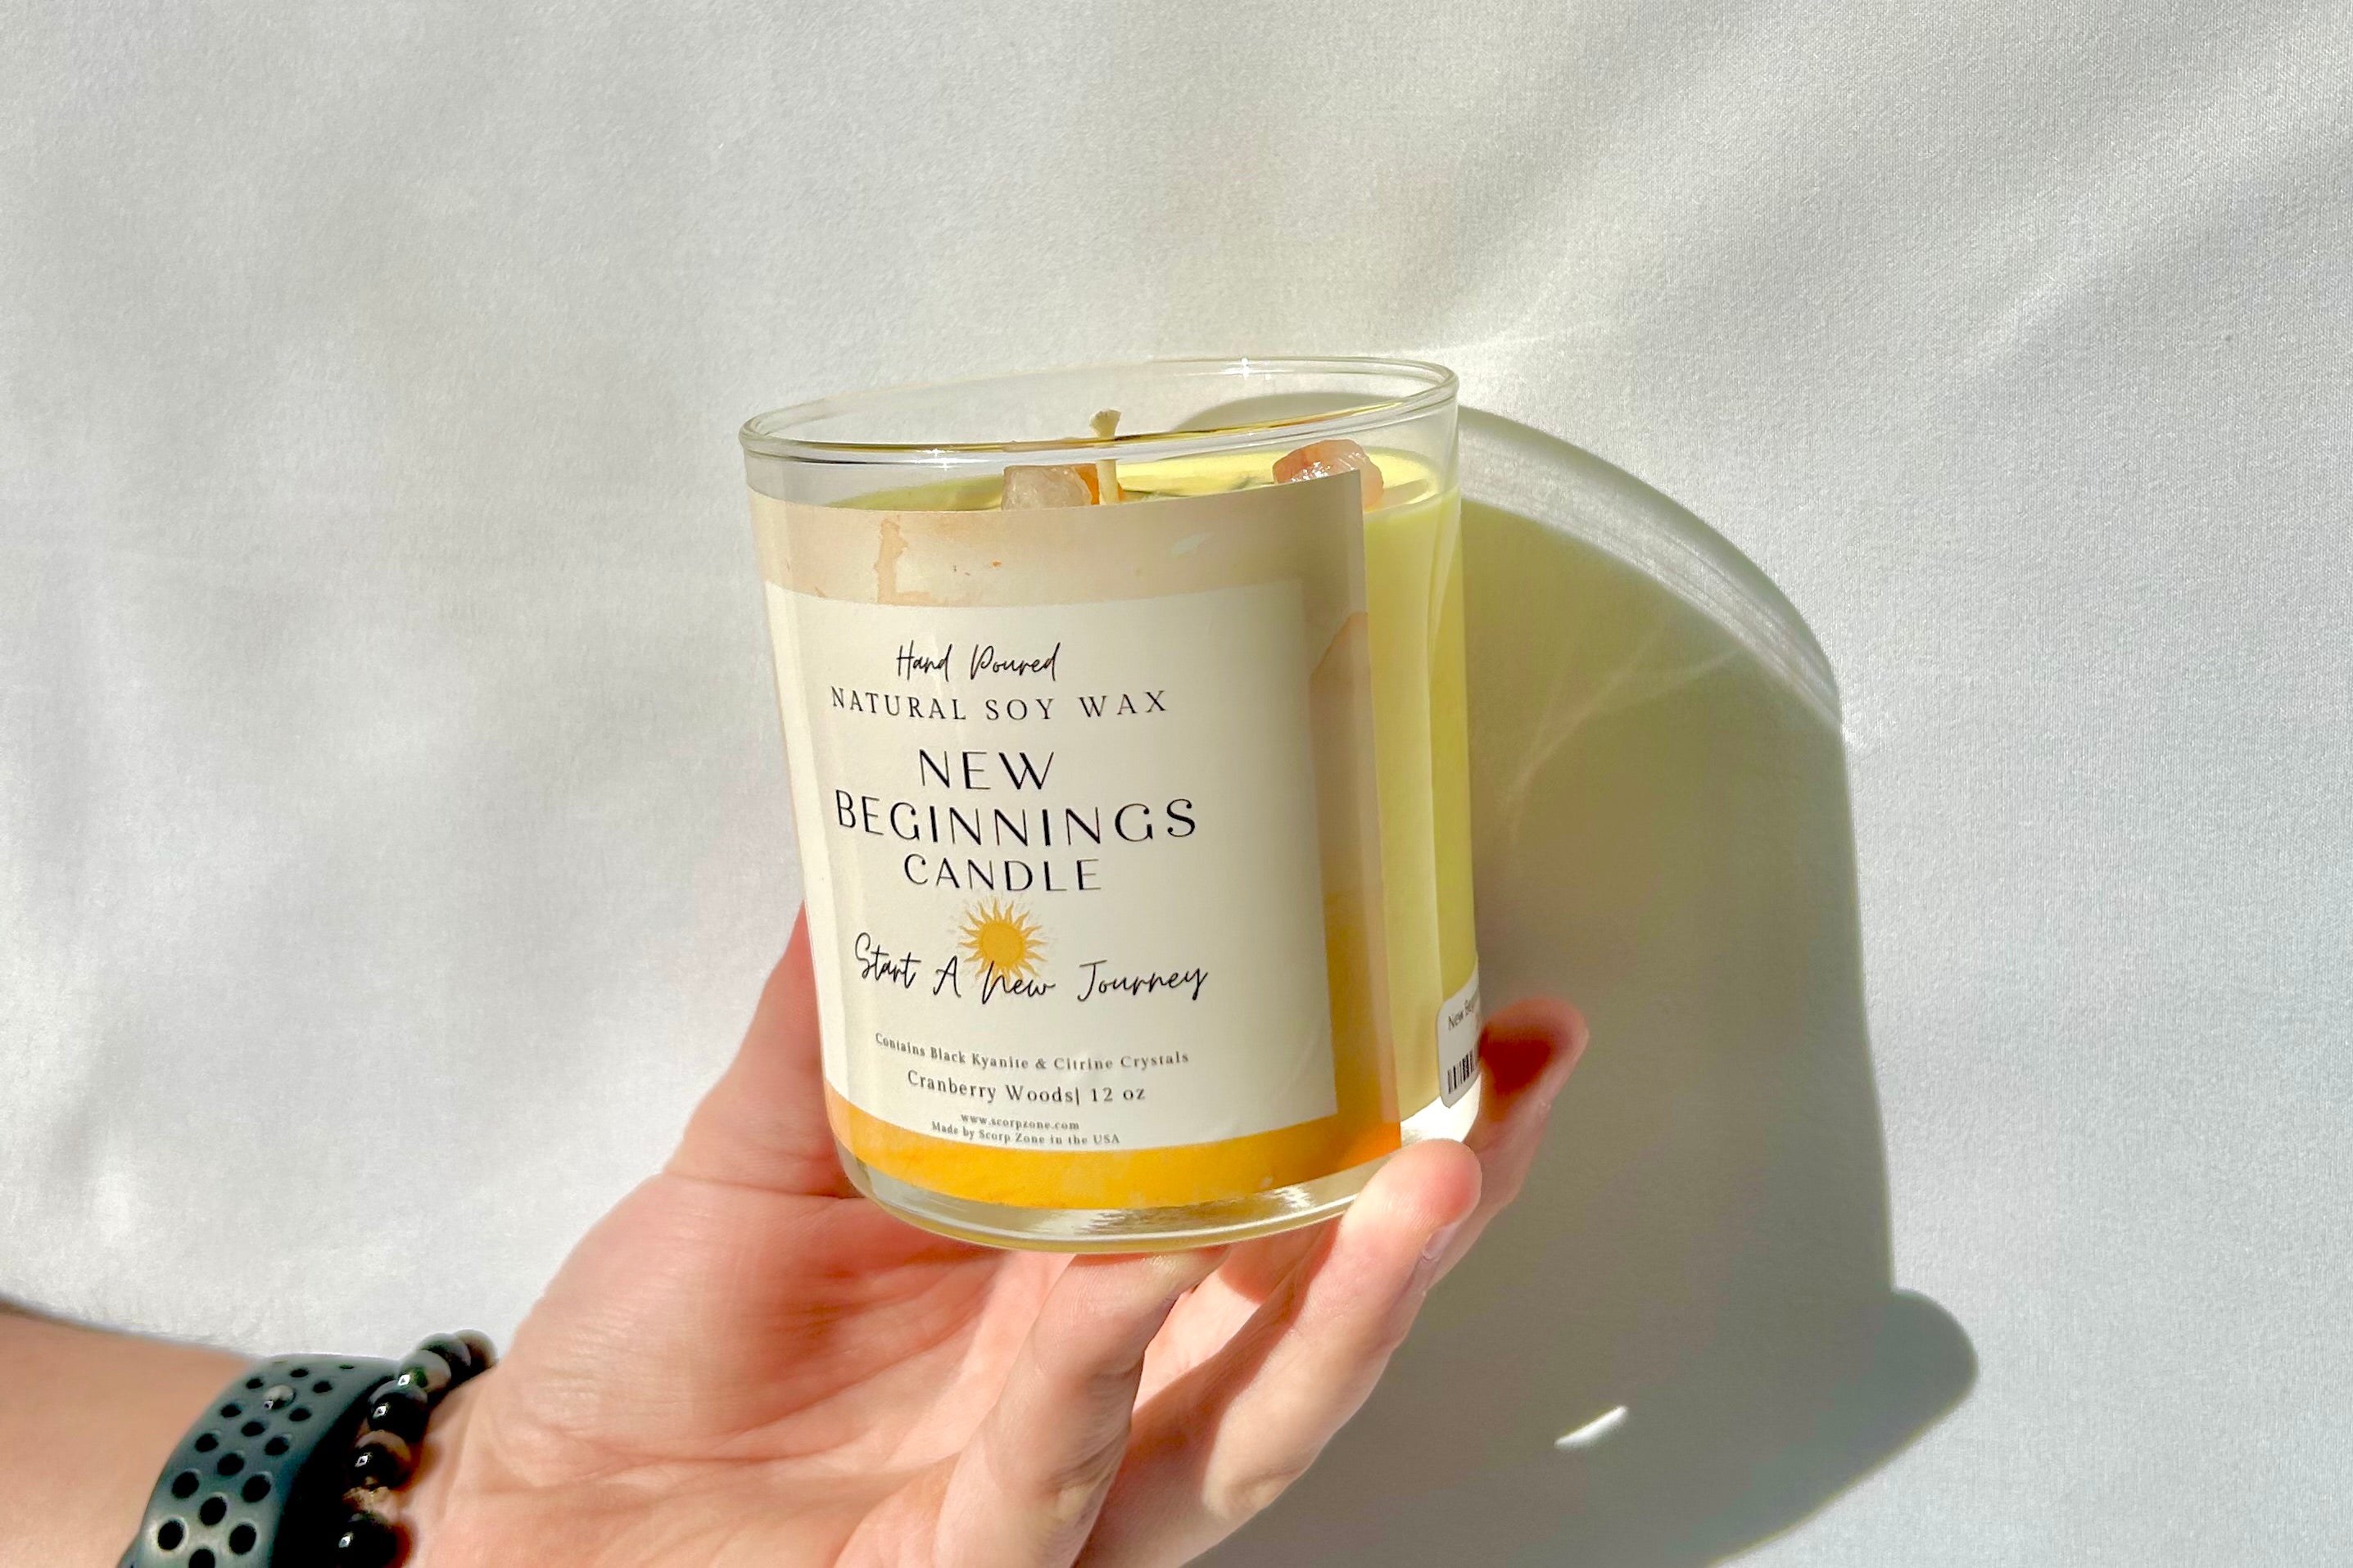 New Beginnings Soy Wax Candle by Scorp Zone